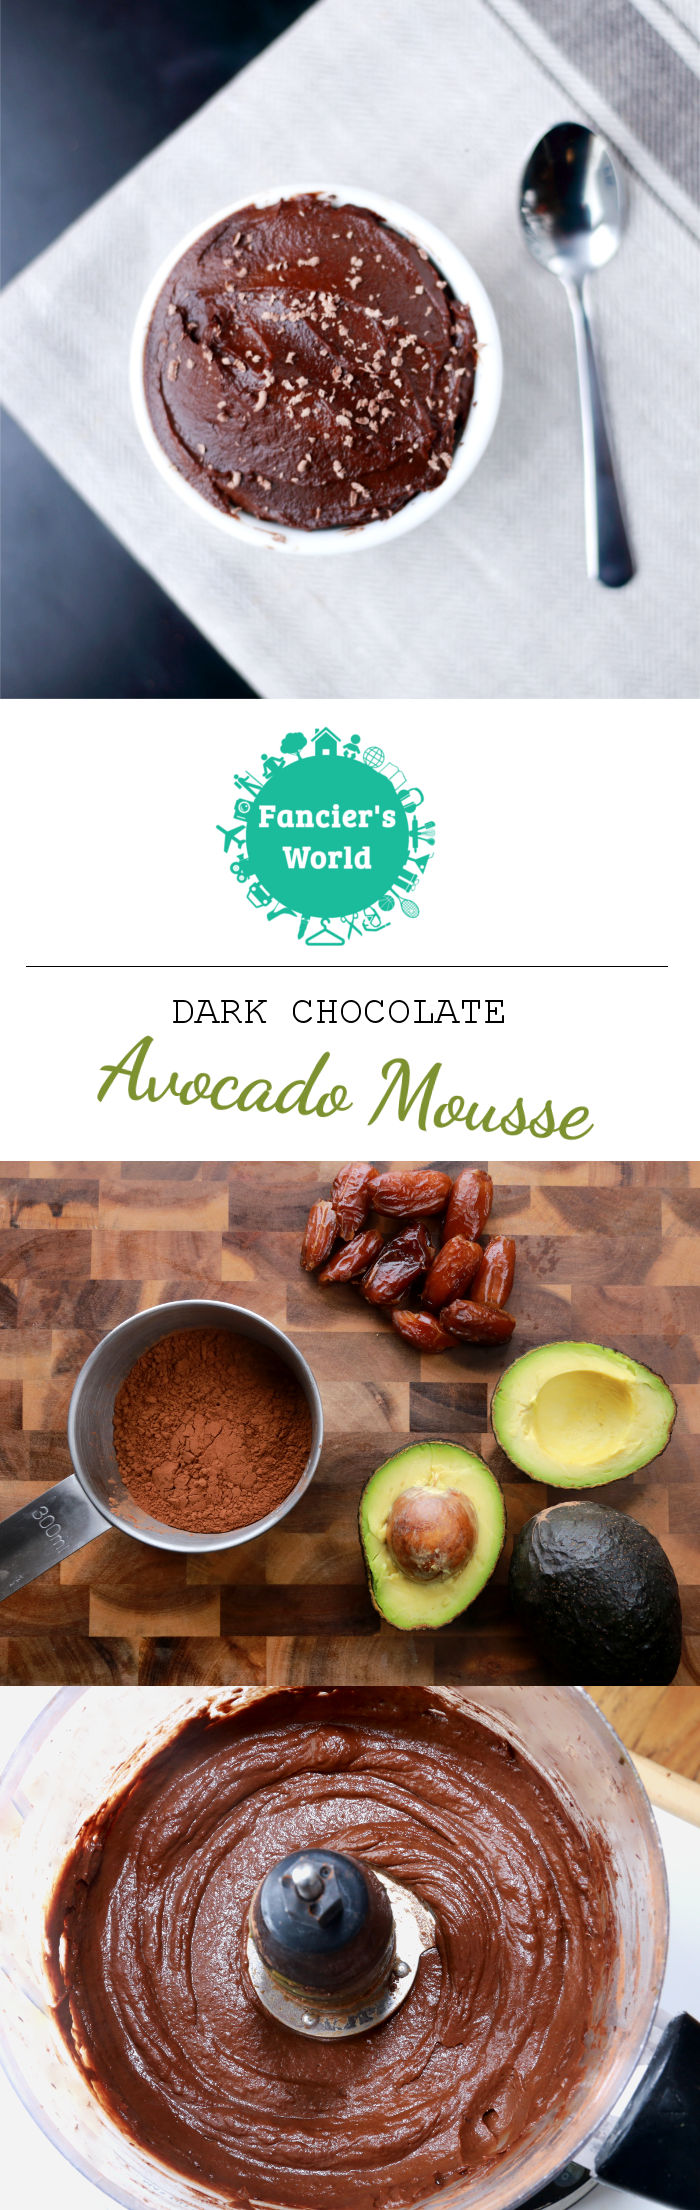 This vegan dark choocolate avocado mousse recipe is a 3-steps and 3-ingredients recipe which gives a smooth guilt-free chocolate dessert.